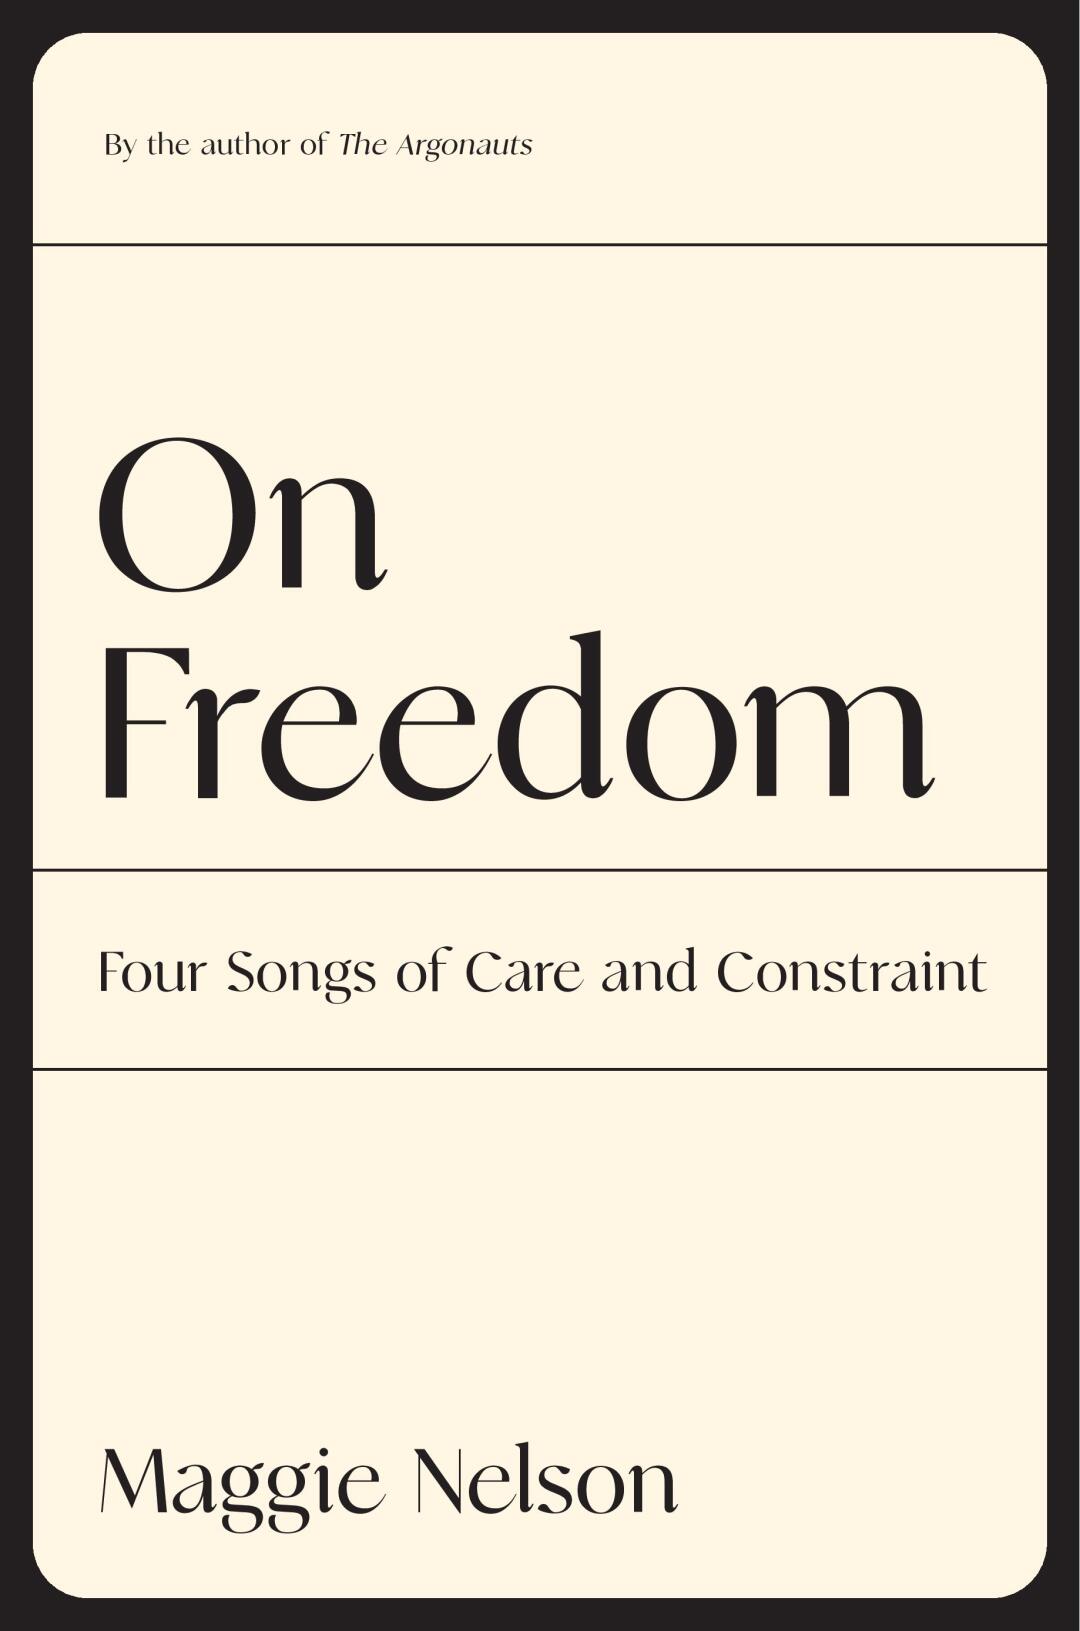 The cover of "On Freedom," by Maggie Nelson